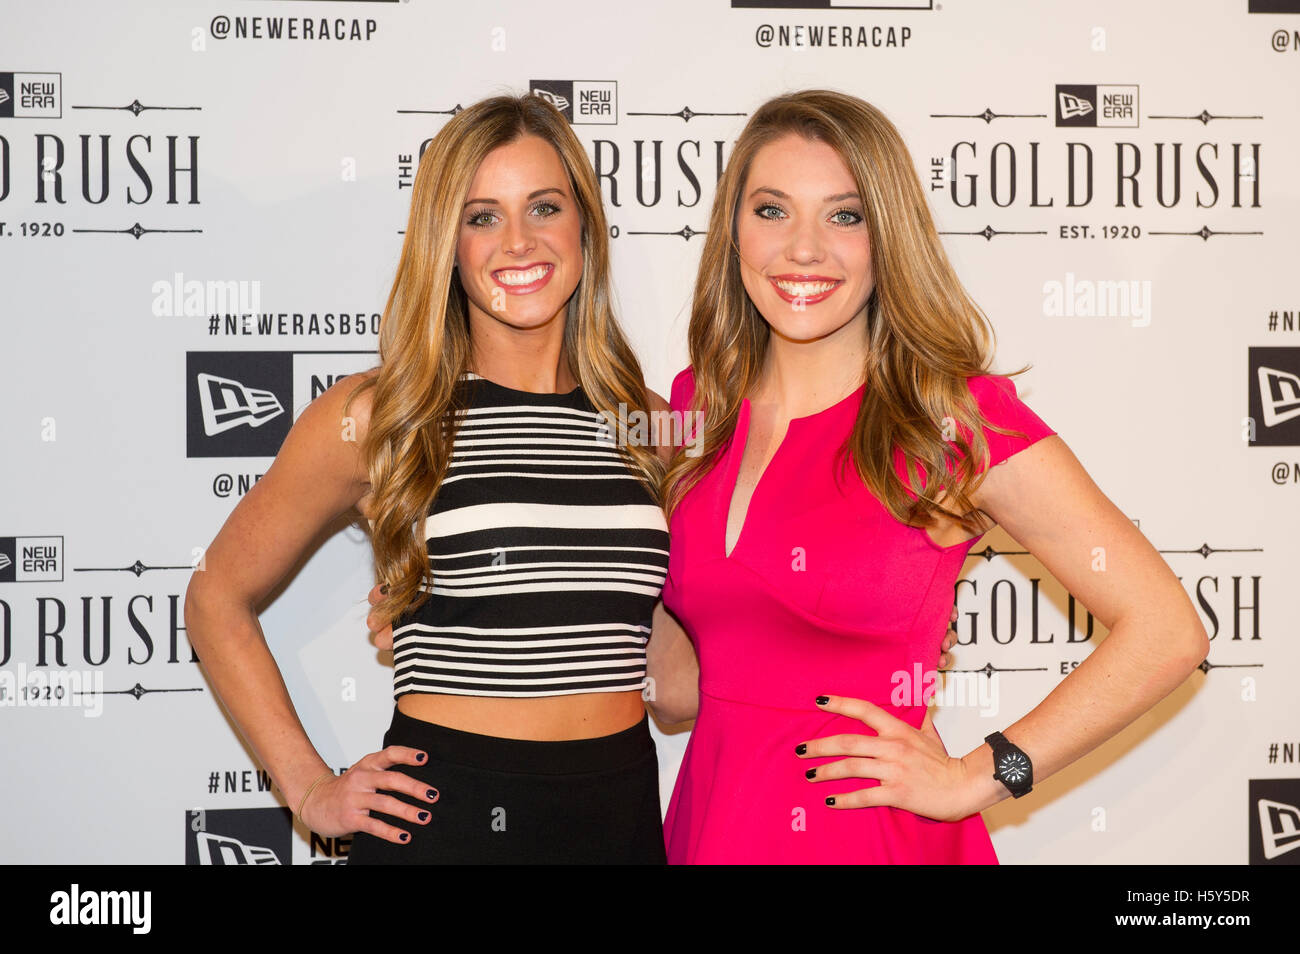 erin-kelly-shelby-rush-arrive-on-the-red-carpet-at-the-gold-rush